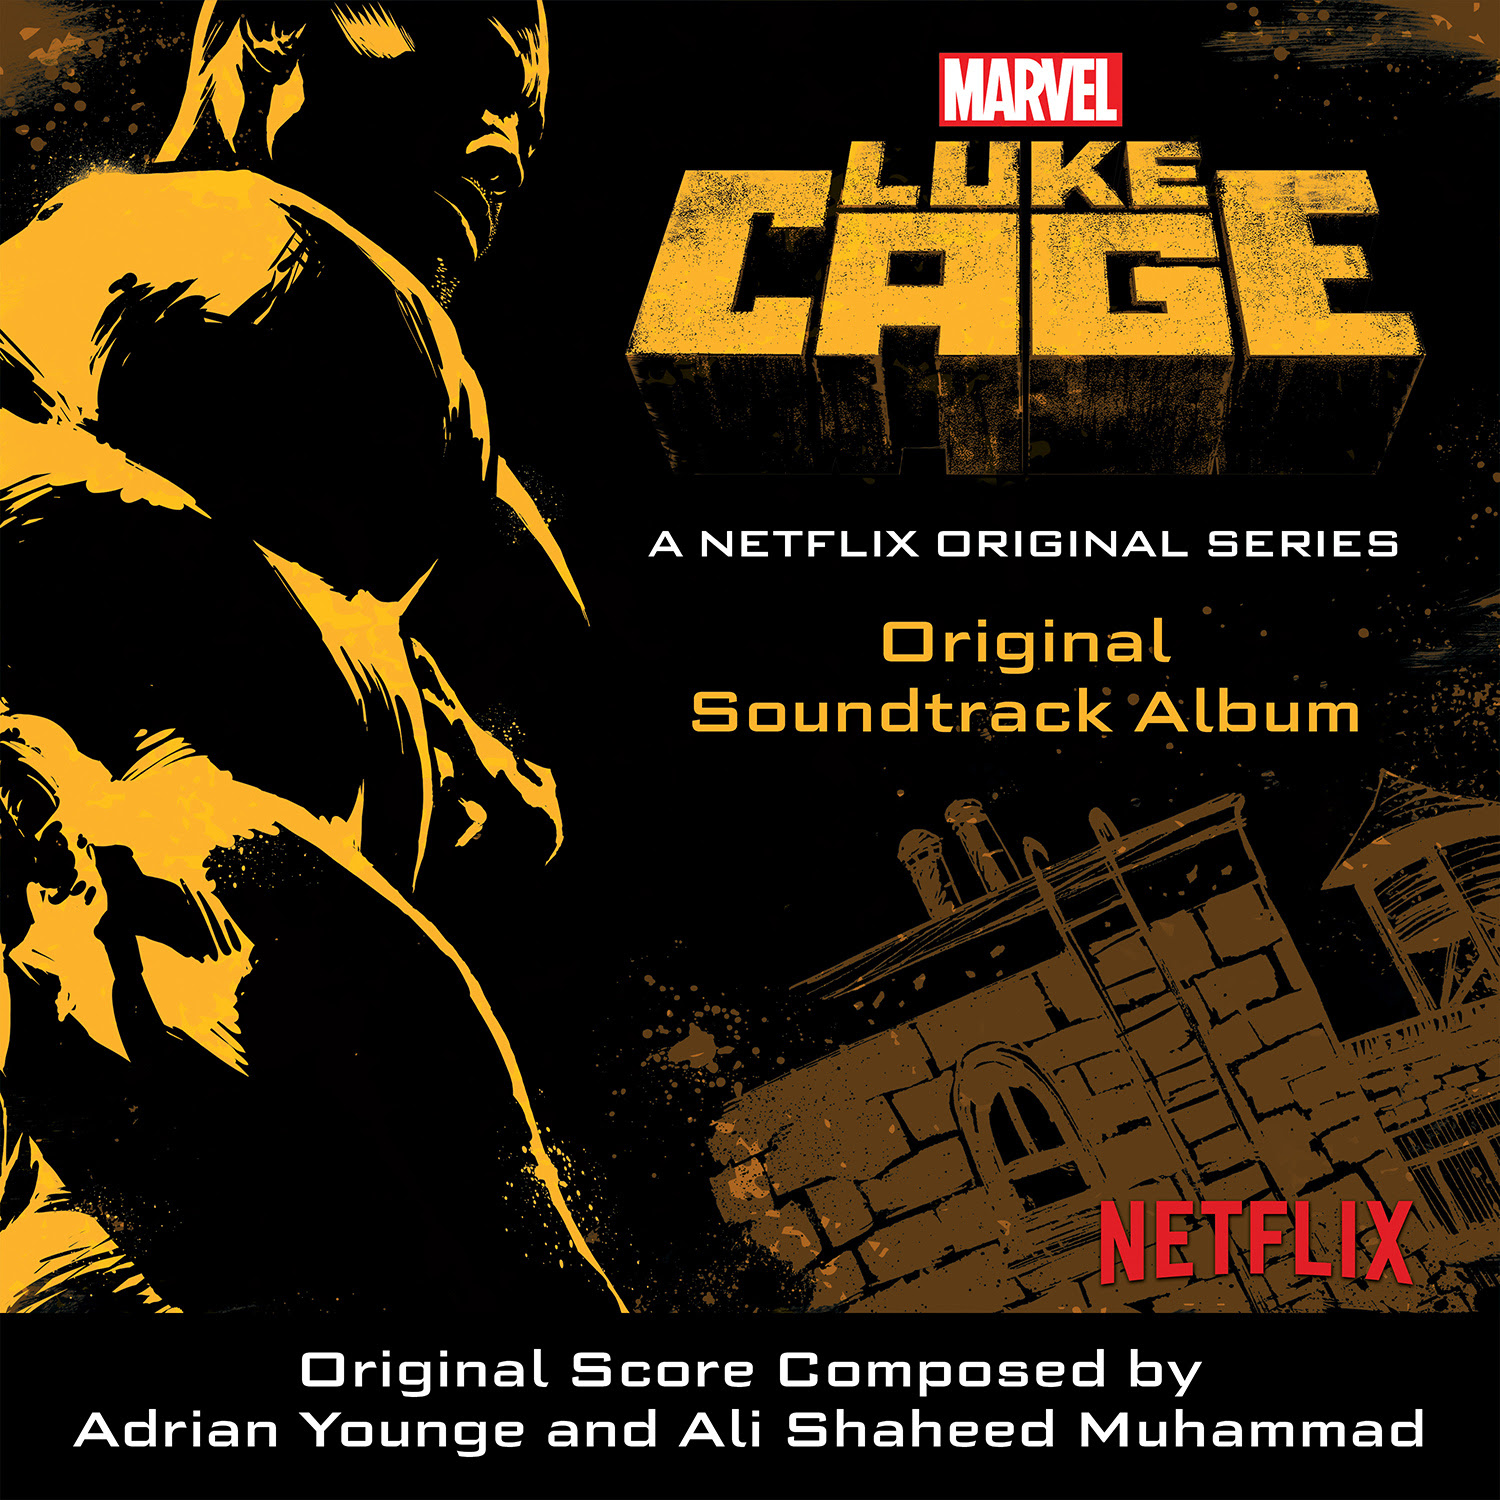 Marvel's "Luke Cage" Soundtrack Now Available